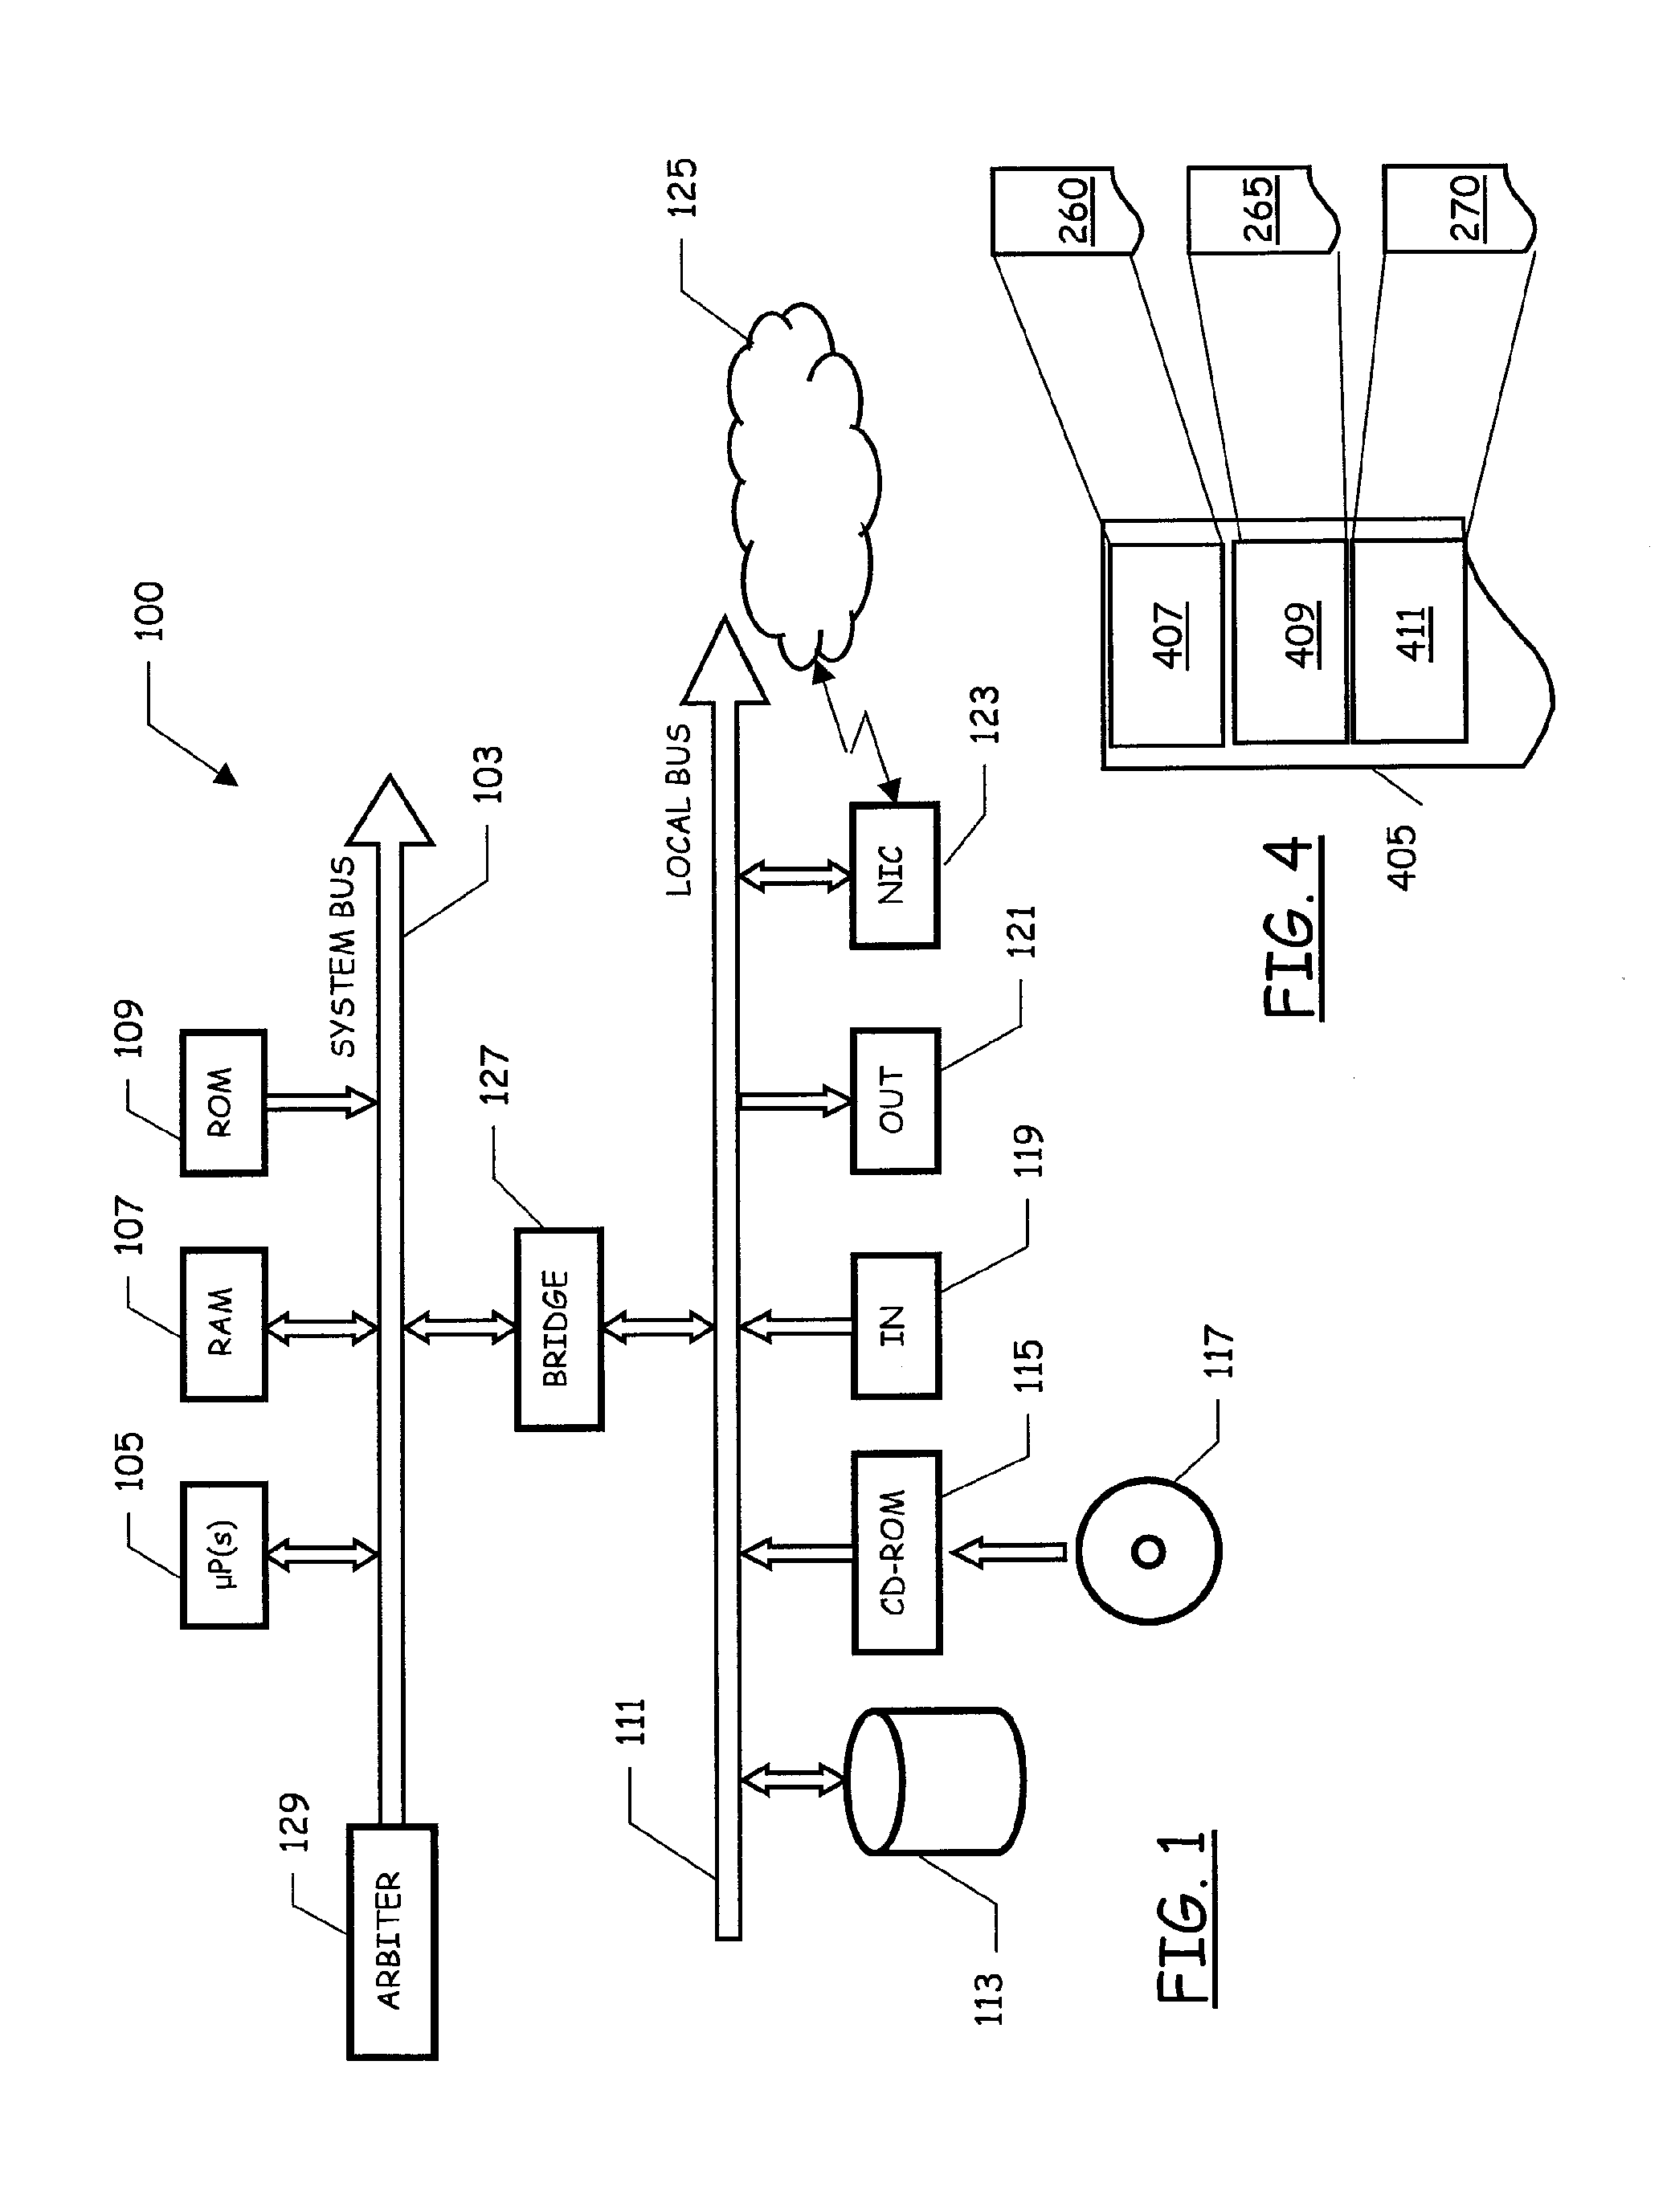 Method and system for simulating job entry subsystem (JES) operation